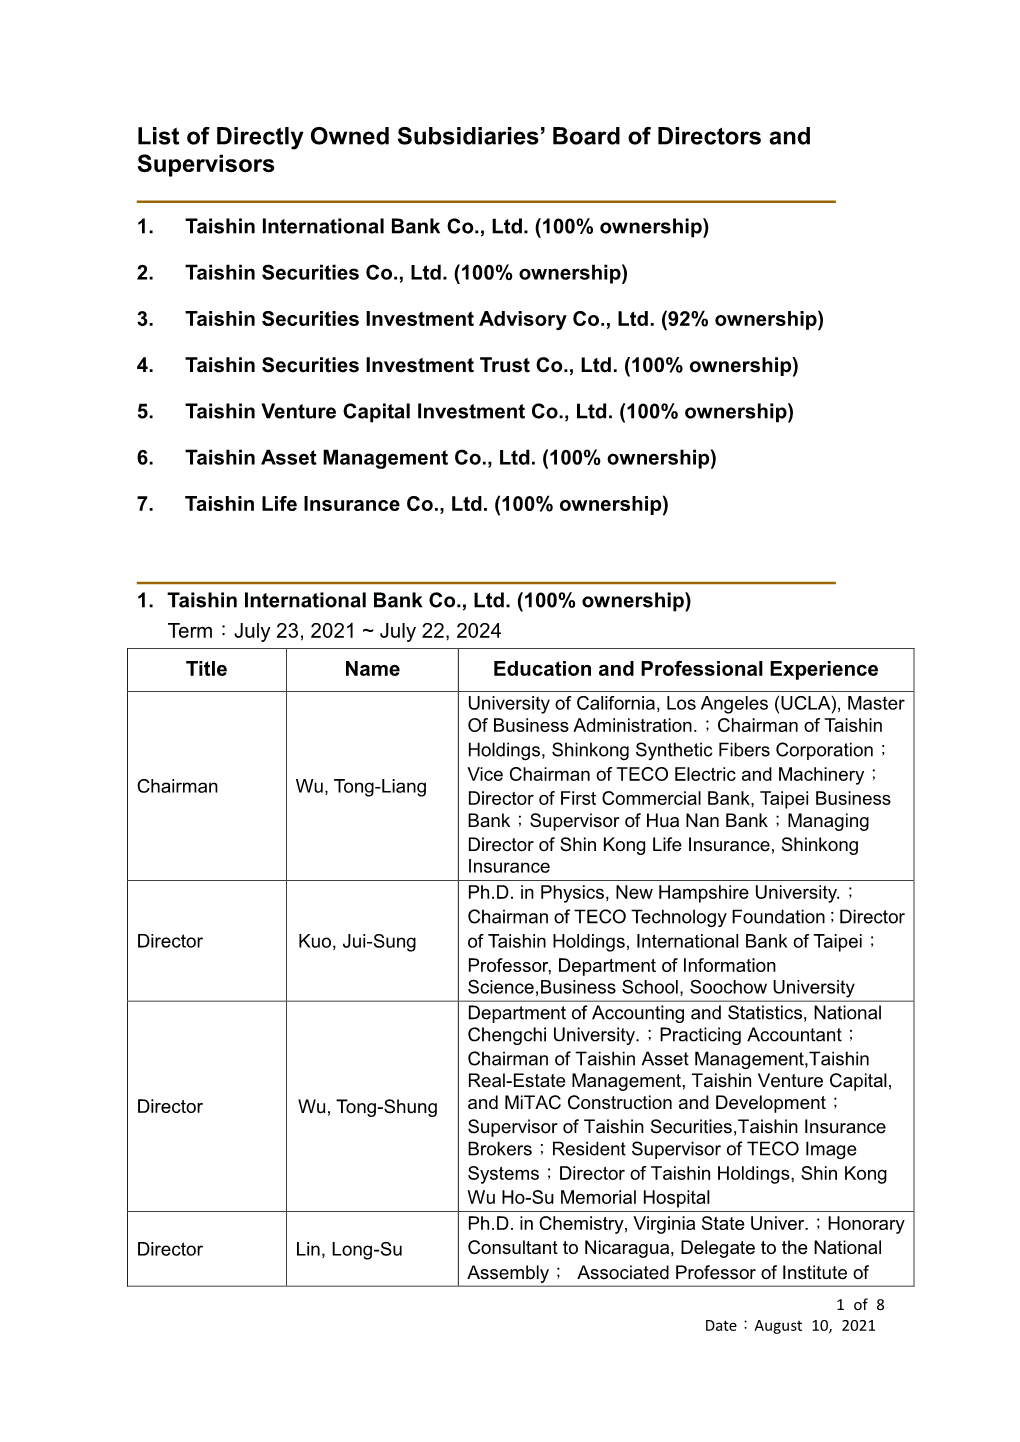 List of Directly Owned Subsidiaries' Board of Directors and Supervisors